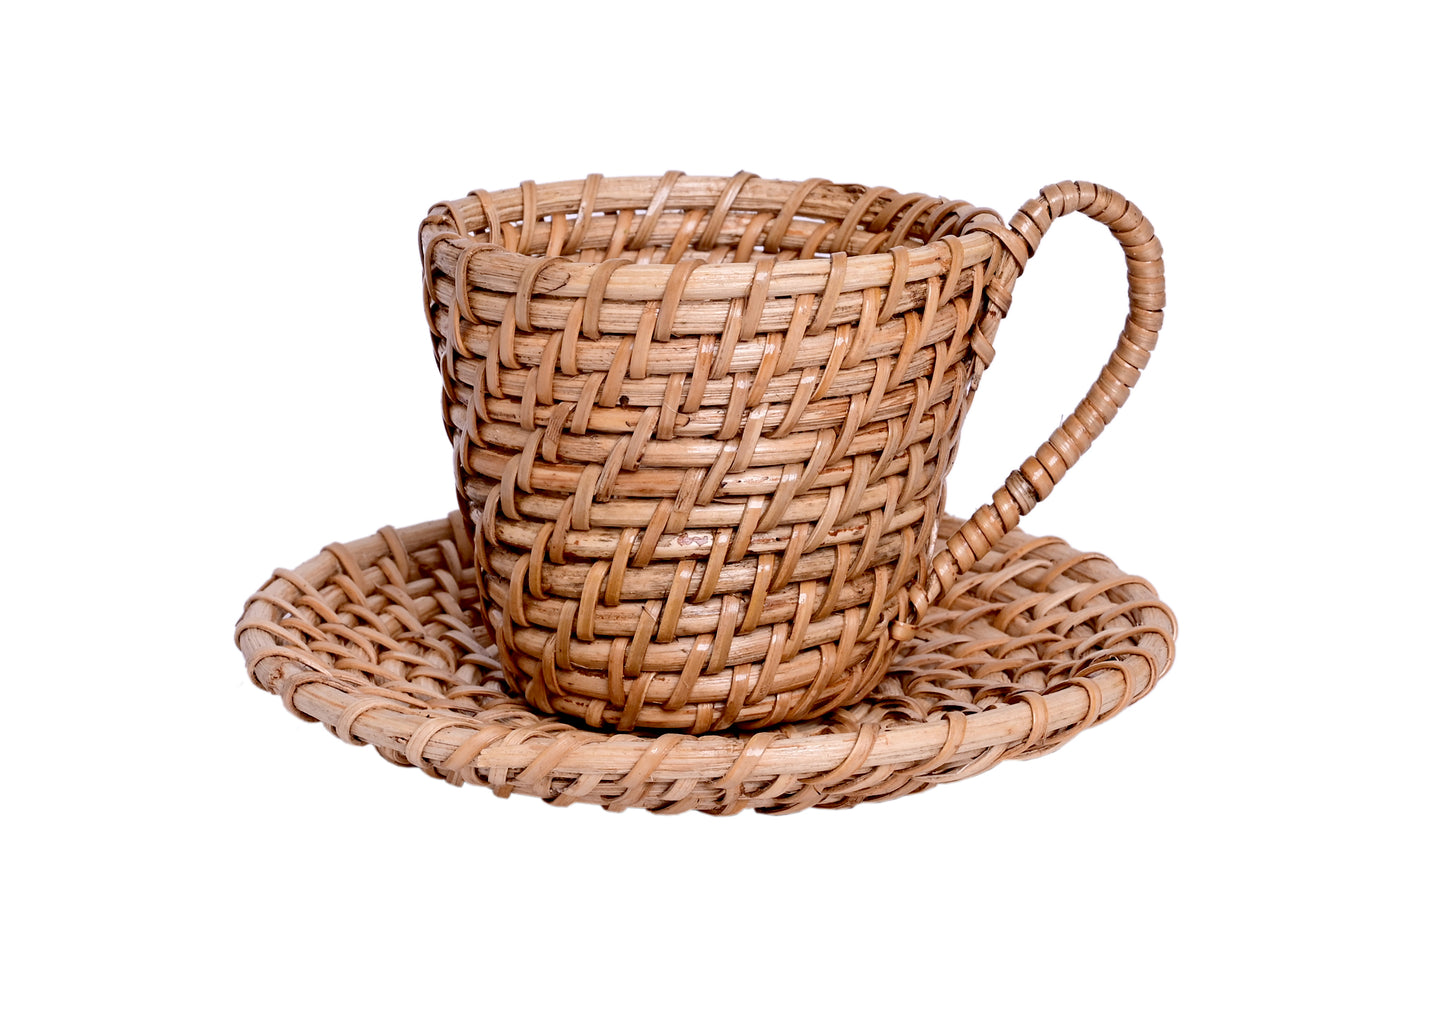 The Weaver's Nest Handmade Natural Cane Cup and Saucer  Planter for Home, Table Tops, Restaurants, Garden, Cafe, Balcony, Living Room